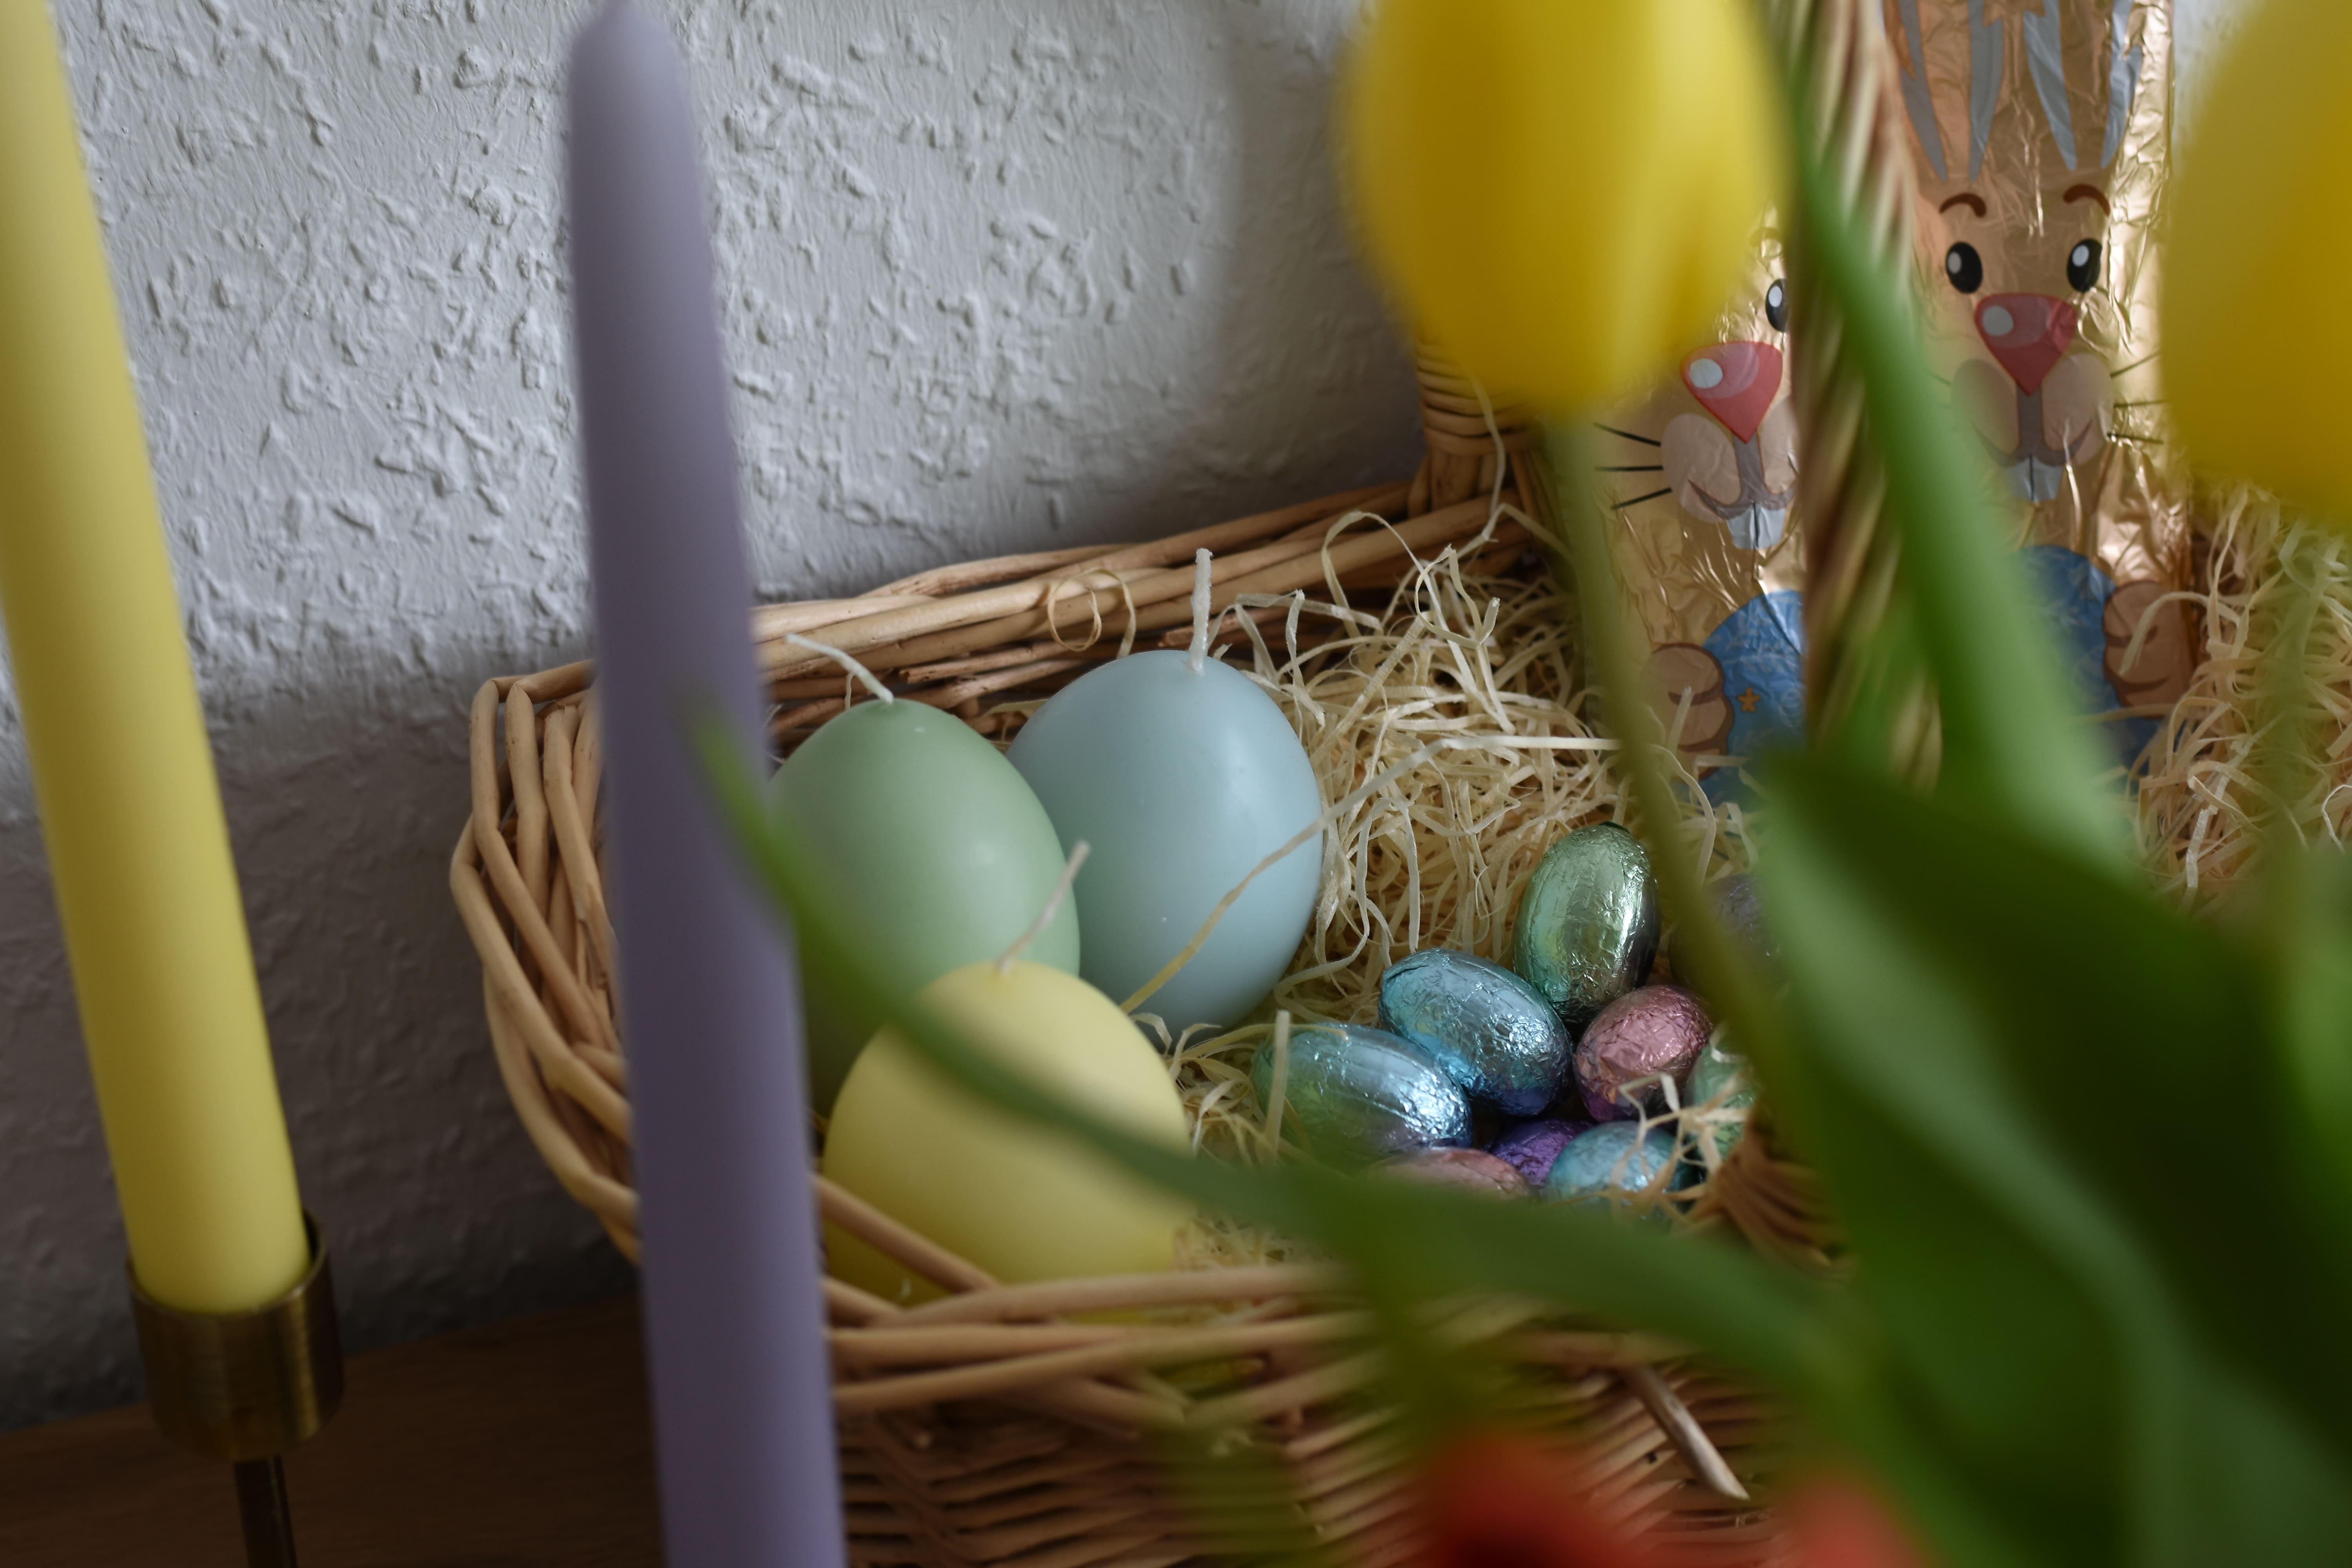 Easter 2024 #Easter #2024 #spring  #March #April #holidays #eggs #candles #bunnies #flowers #tulips #green #warm #cosy #home #yellow #red #palepurple #abasket #chocolate